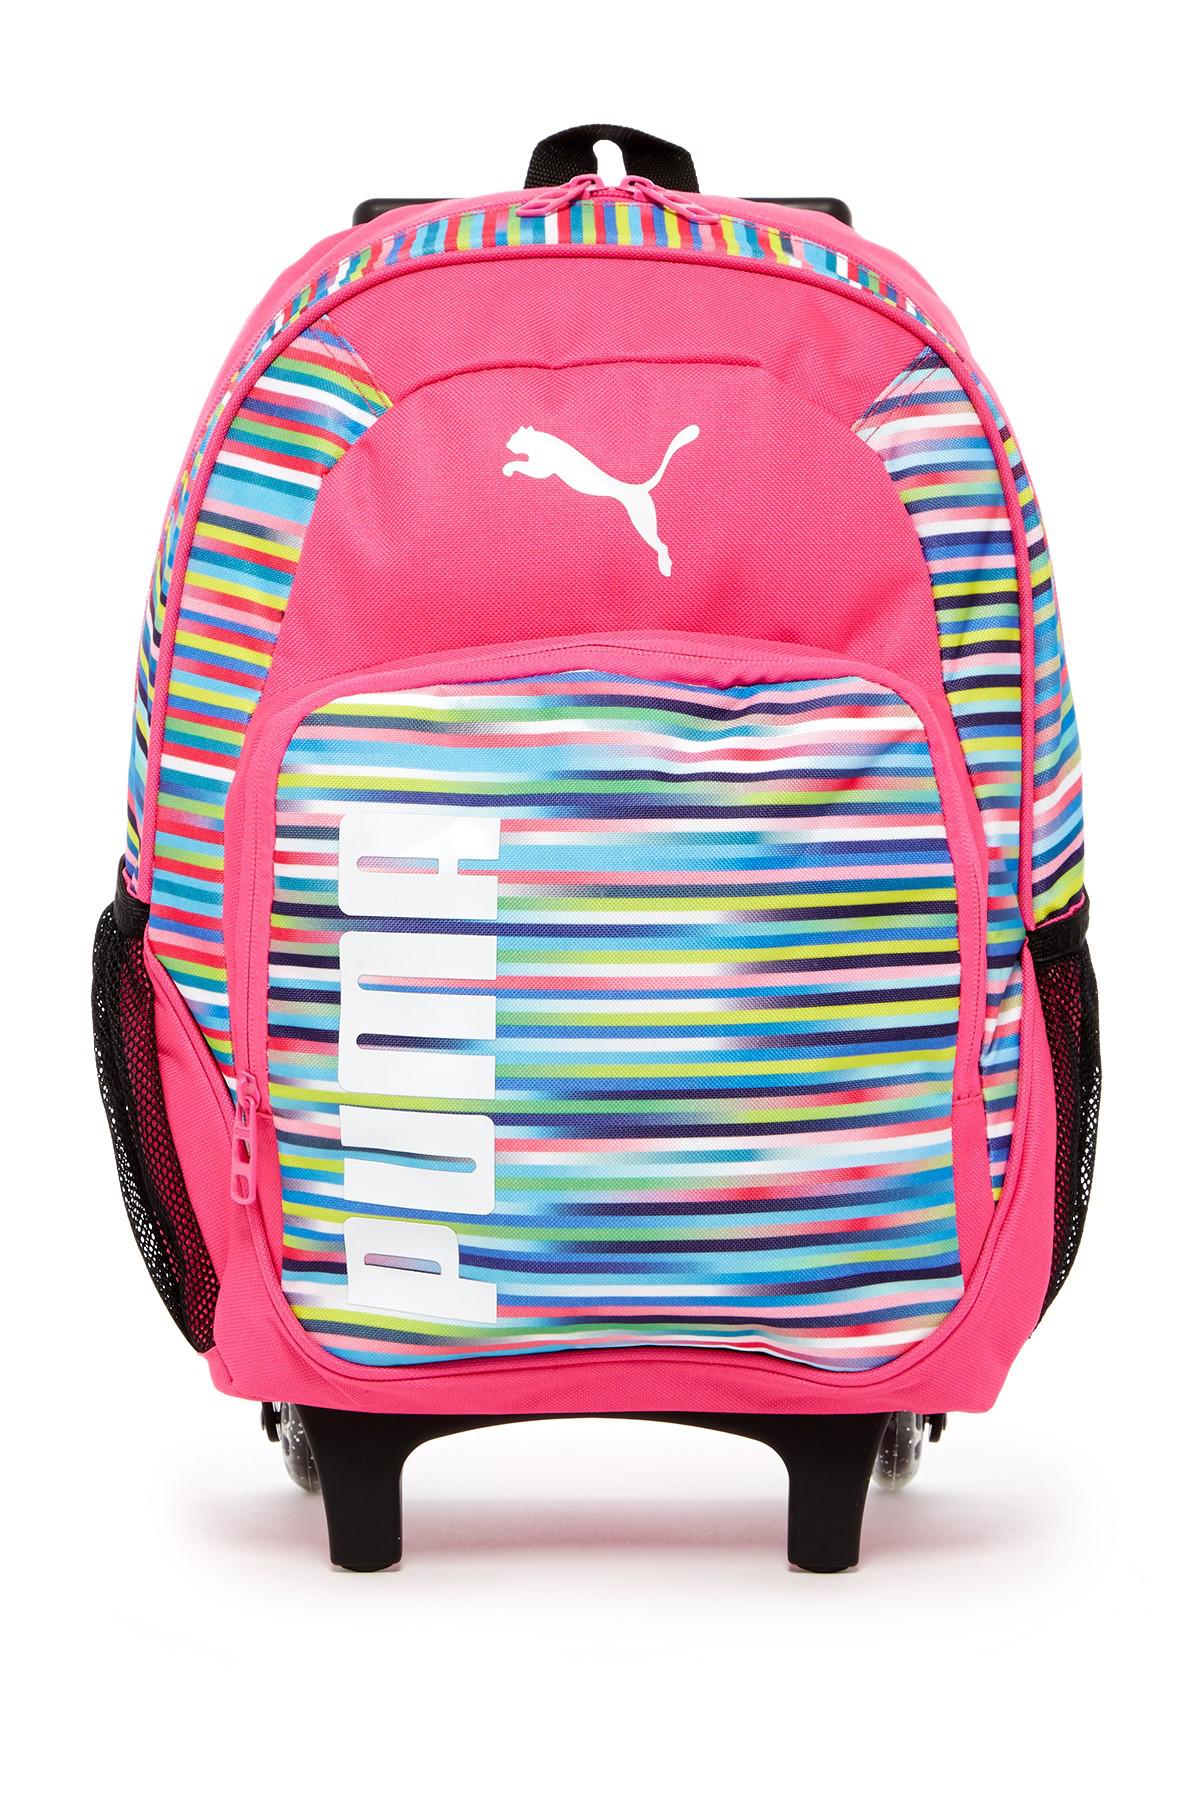 PUMA Rolling Wheeled Backpack in Pink 